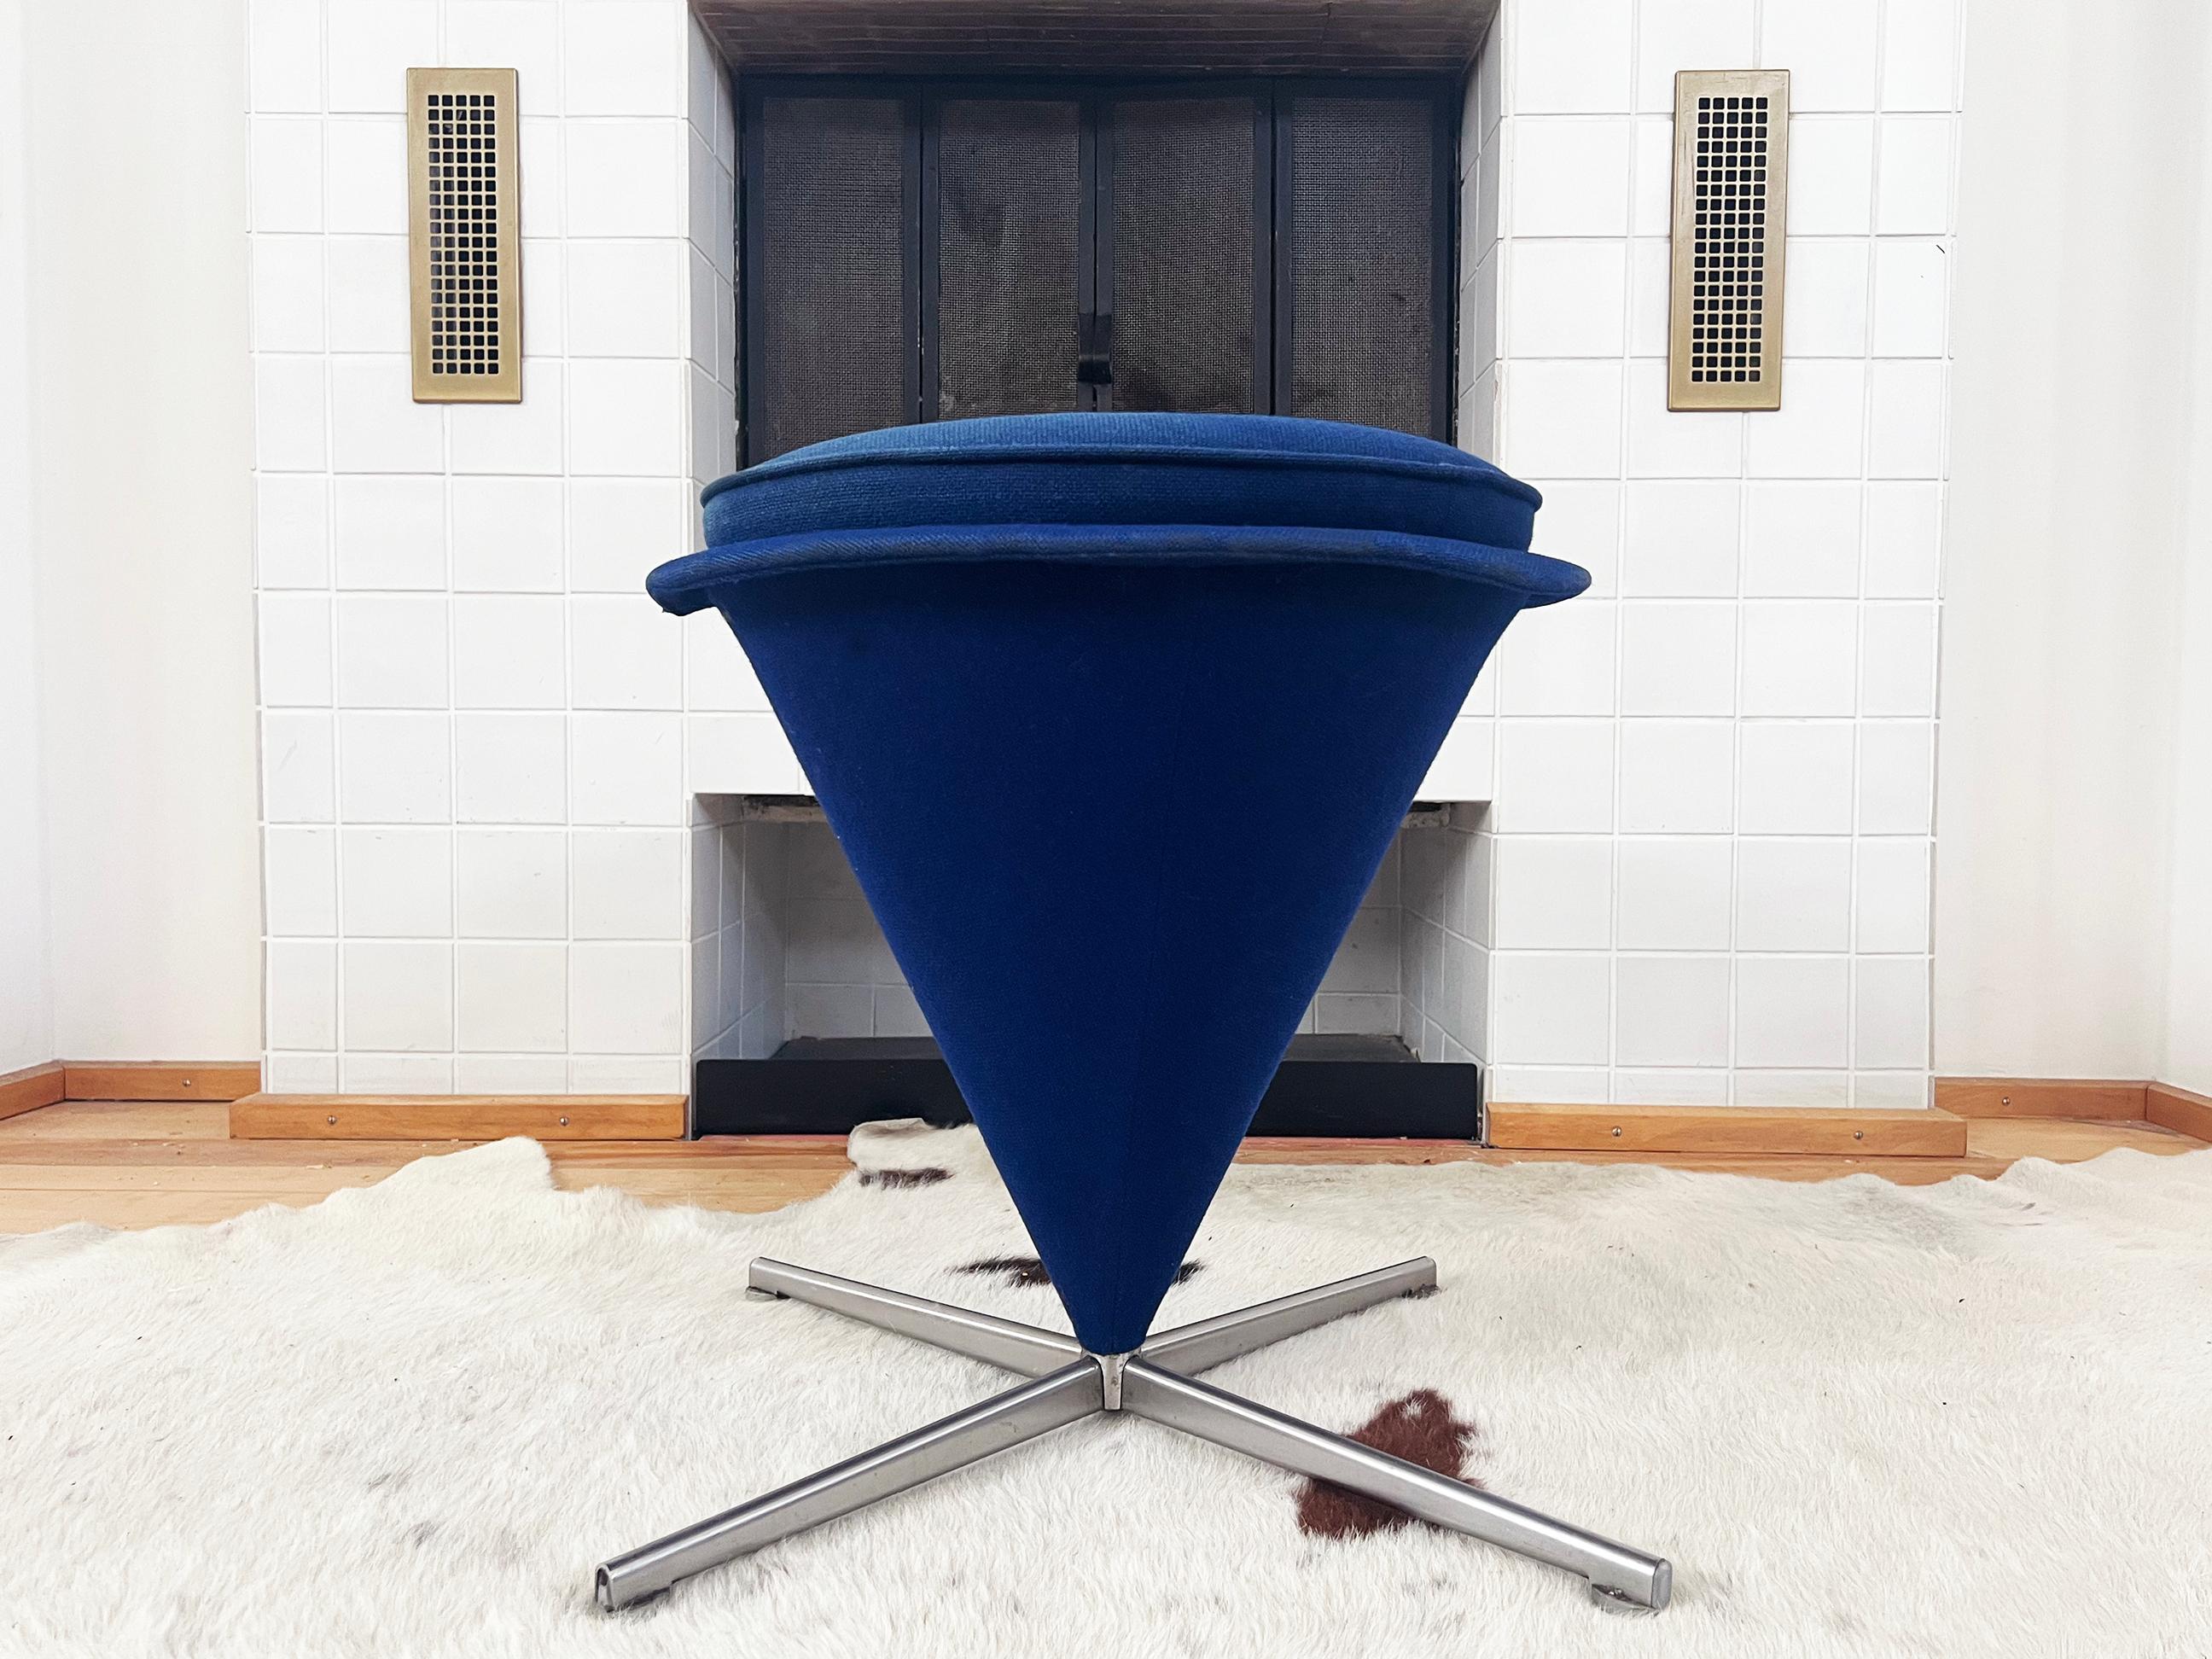 Steel 1960s Original Early Verner Panton Cone Swivel Chair + Ottoman SET-- 2 pieces For Sale